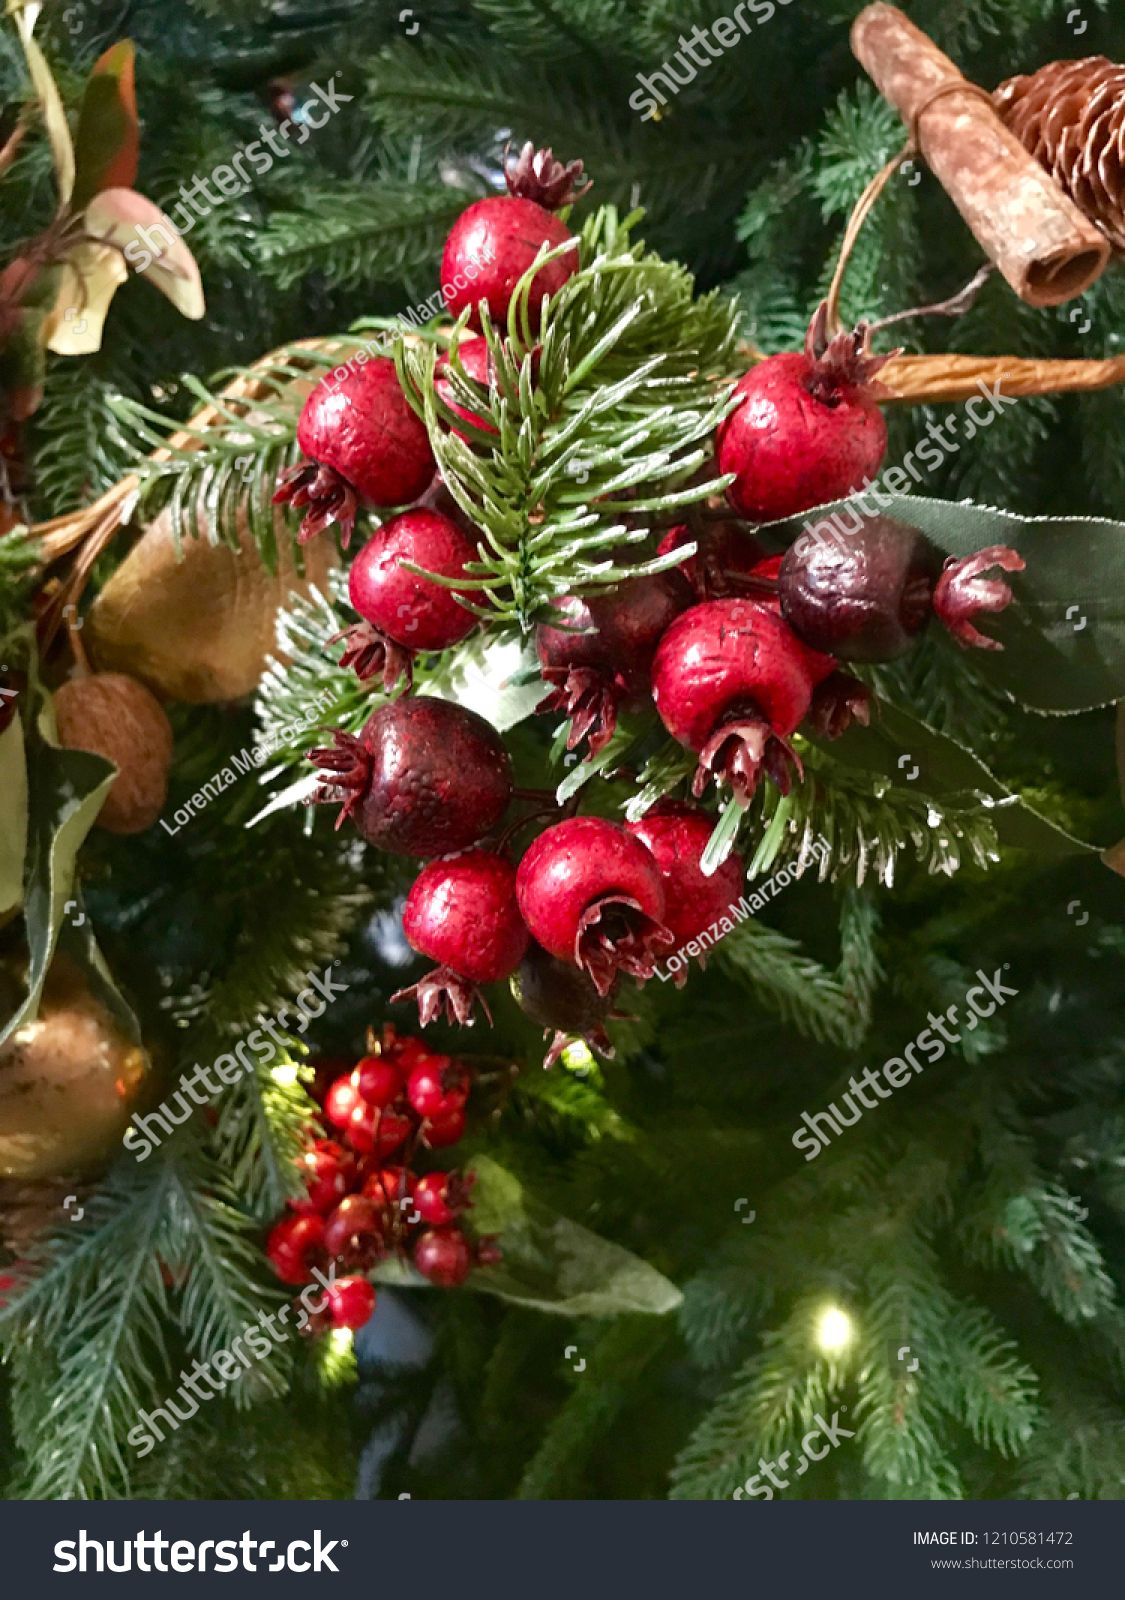 Festive Christmas Decorations Cranberries Holly Berries Stock Photo Edit Now 1210581472